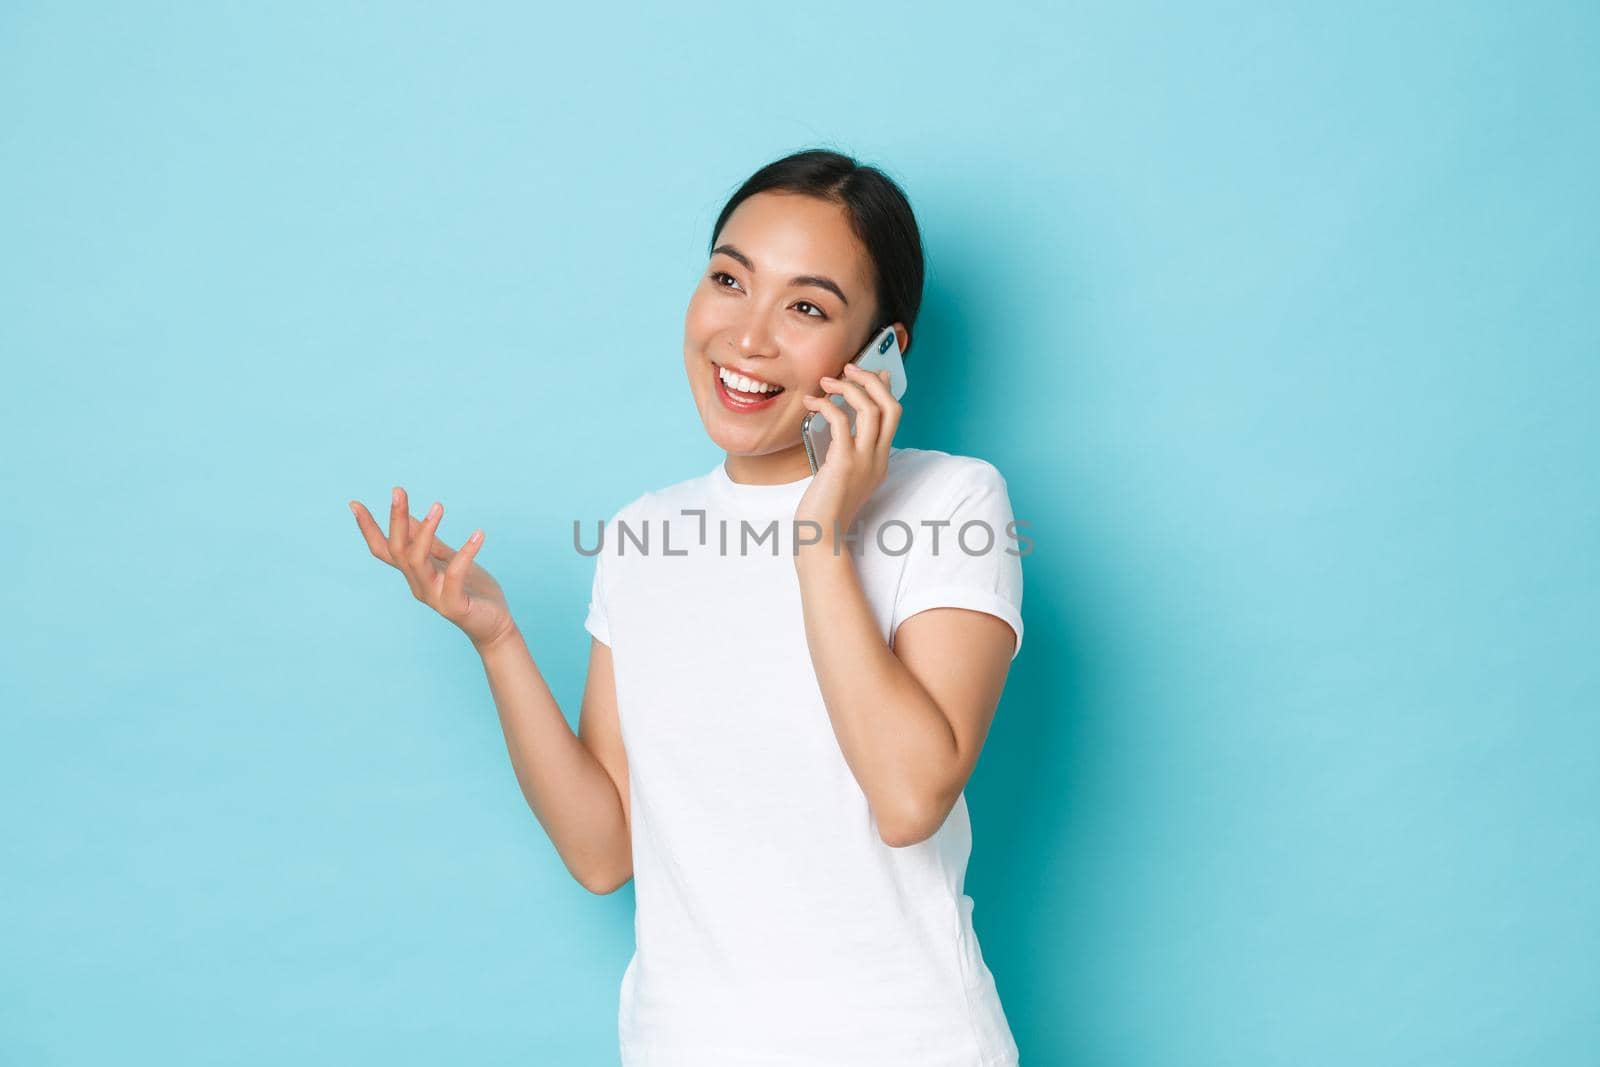 Lifestyle, people and beauty concept. Young attractive asain girl discussing something, having cheerful conversation, talking on mobile phone and gesturing, smiling upbeat.